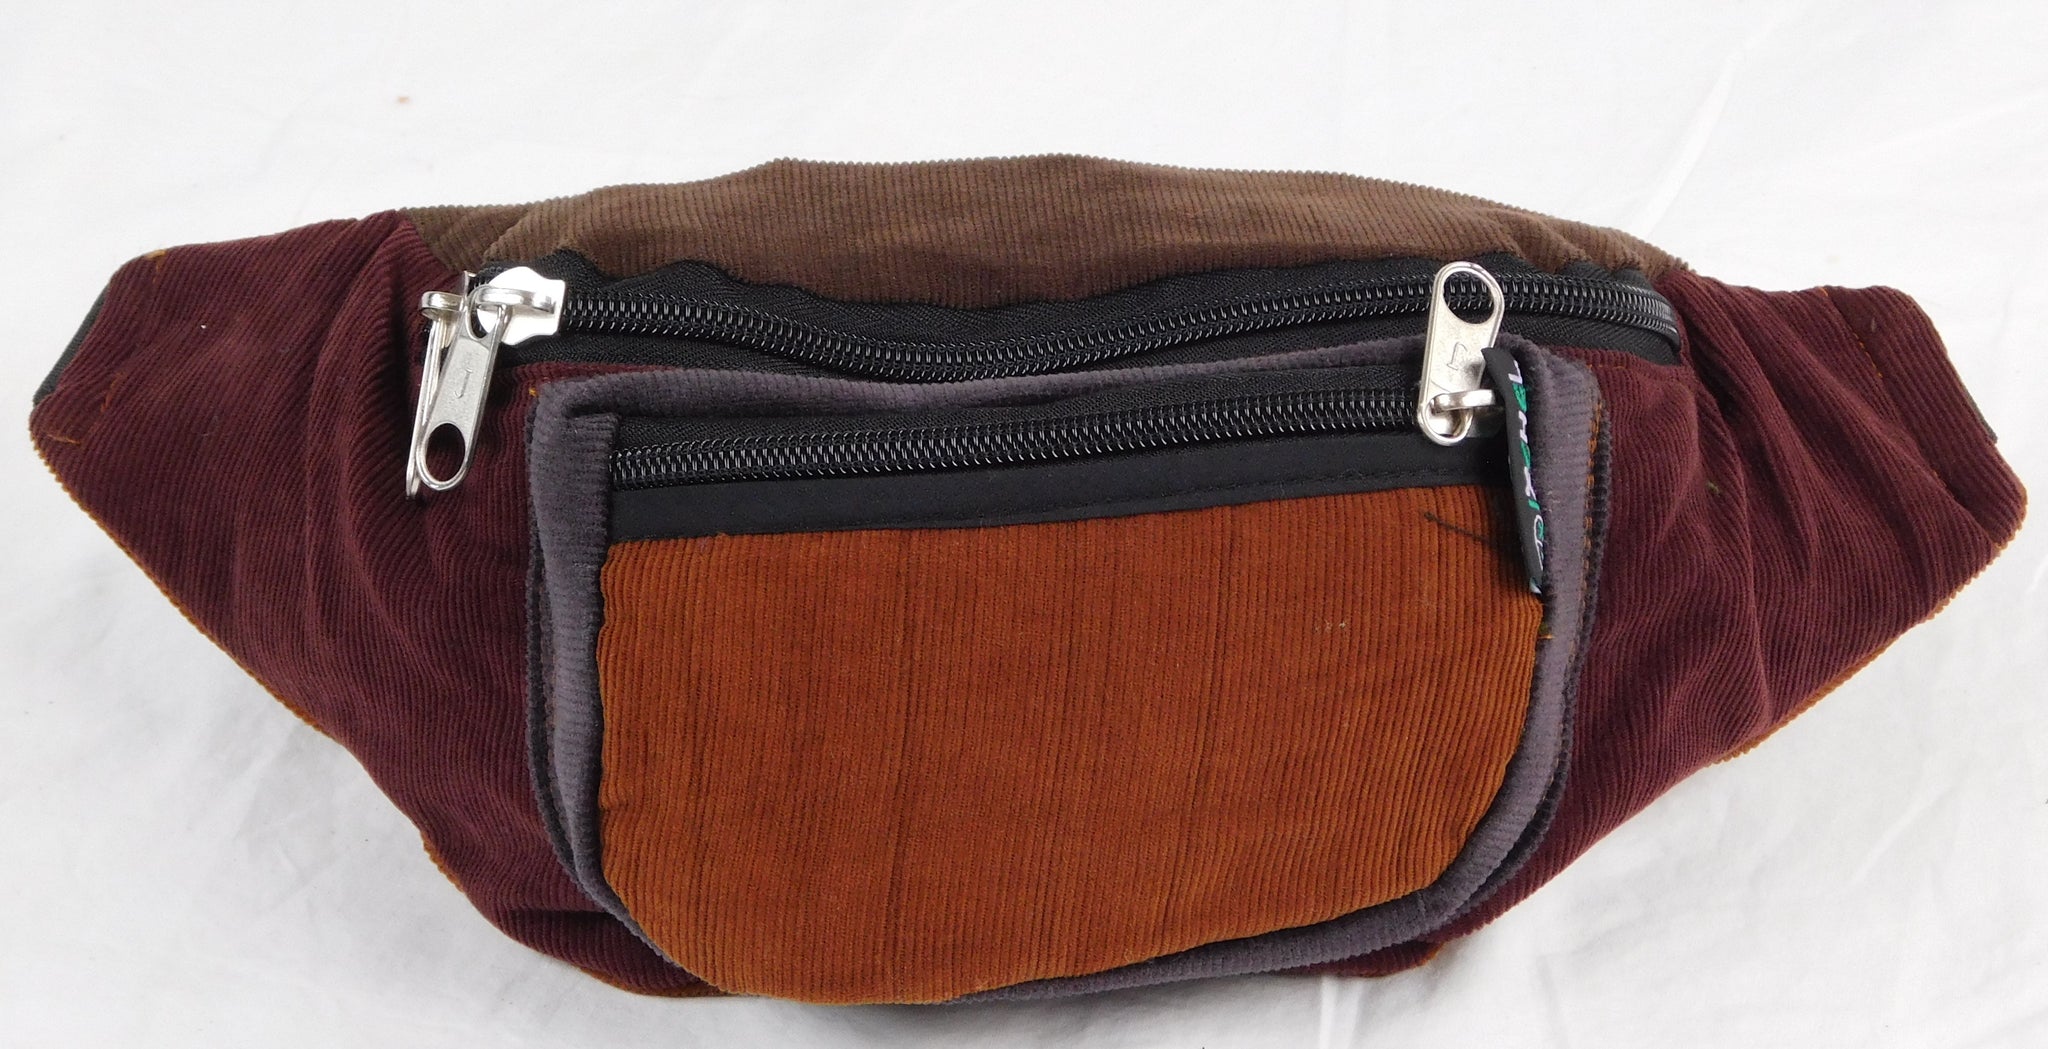 Extra large 3 pocket waist pack in corduroy